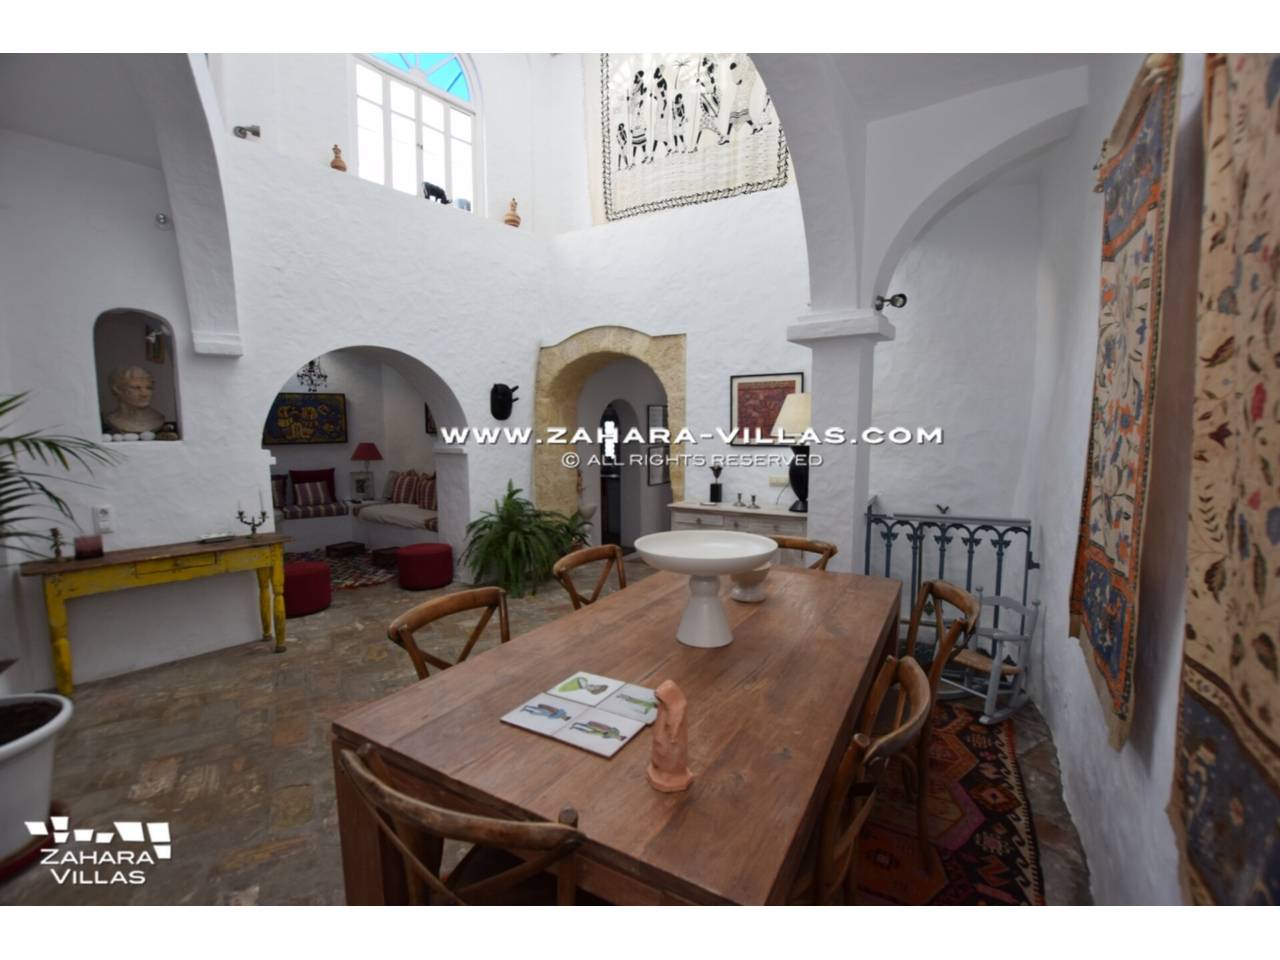 Imagen 6 de Magnificent House with central patio, in the historic center of the town